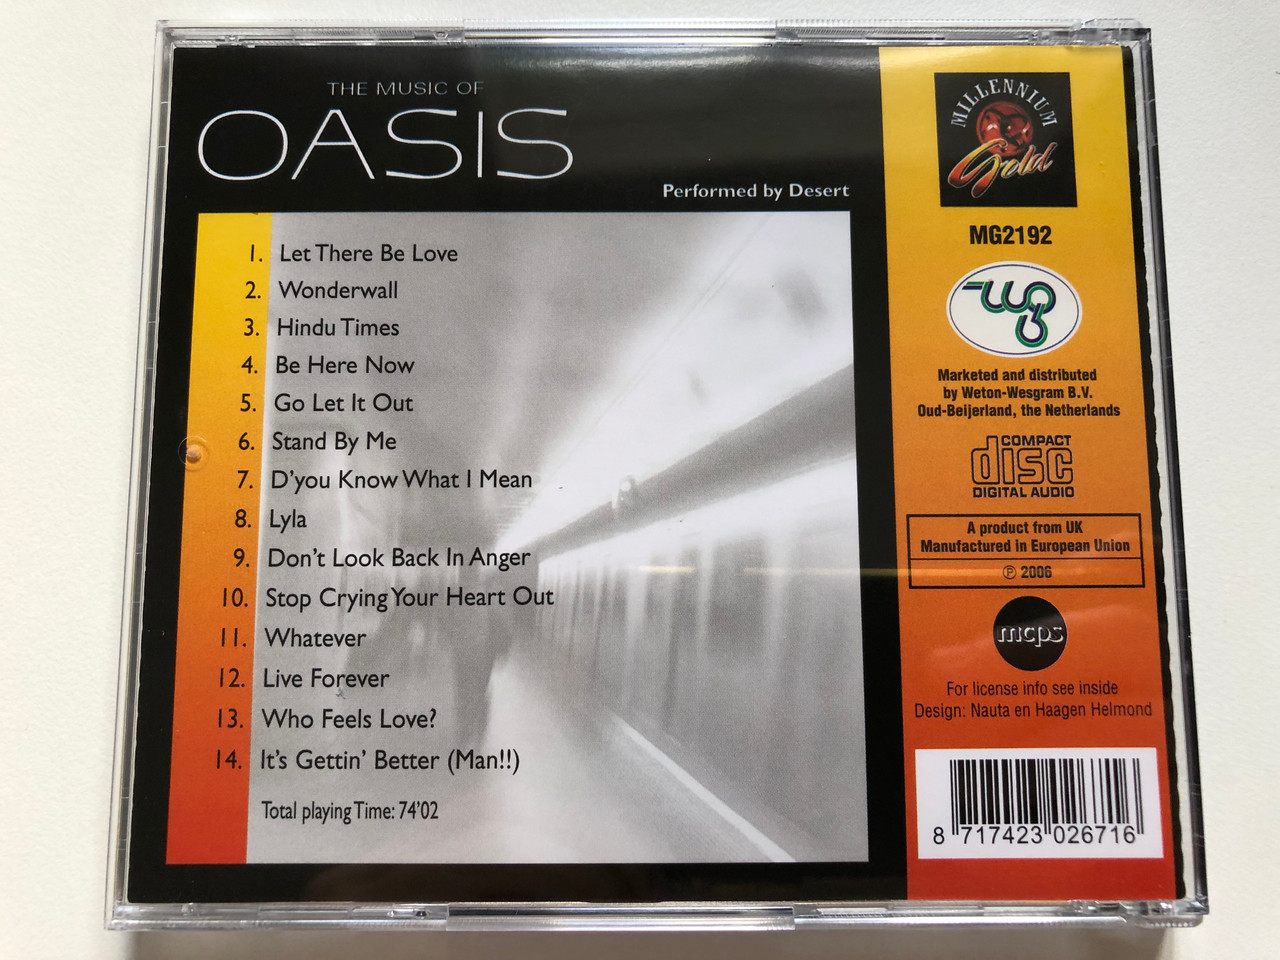 https://cdn10.bigcommerce.com/s-62bdpkt7pb/products/0/images/242720/The_Music_Of_Oasis_-_Performed_By_Desert_Let_There_Be_Love_Wonderwall_Be_Here_Now_Dyou_Know_What_I_Mean_Lyla_Millenium_Gold_Audio_CD_2006_MG2192_4__41111.1658823061.1280.1280.JPG?c=2&_gl=1*1ouqc2y*_ga*MjA2NTIxMjE2MC4xNTkwNTEyNTMy*_ga_WS2VZYPC6G*MTY1ODgxMTM2Mi40OTcuMS4xNjU4ODIyODcyLjM4